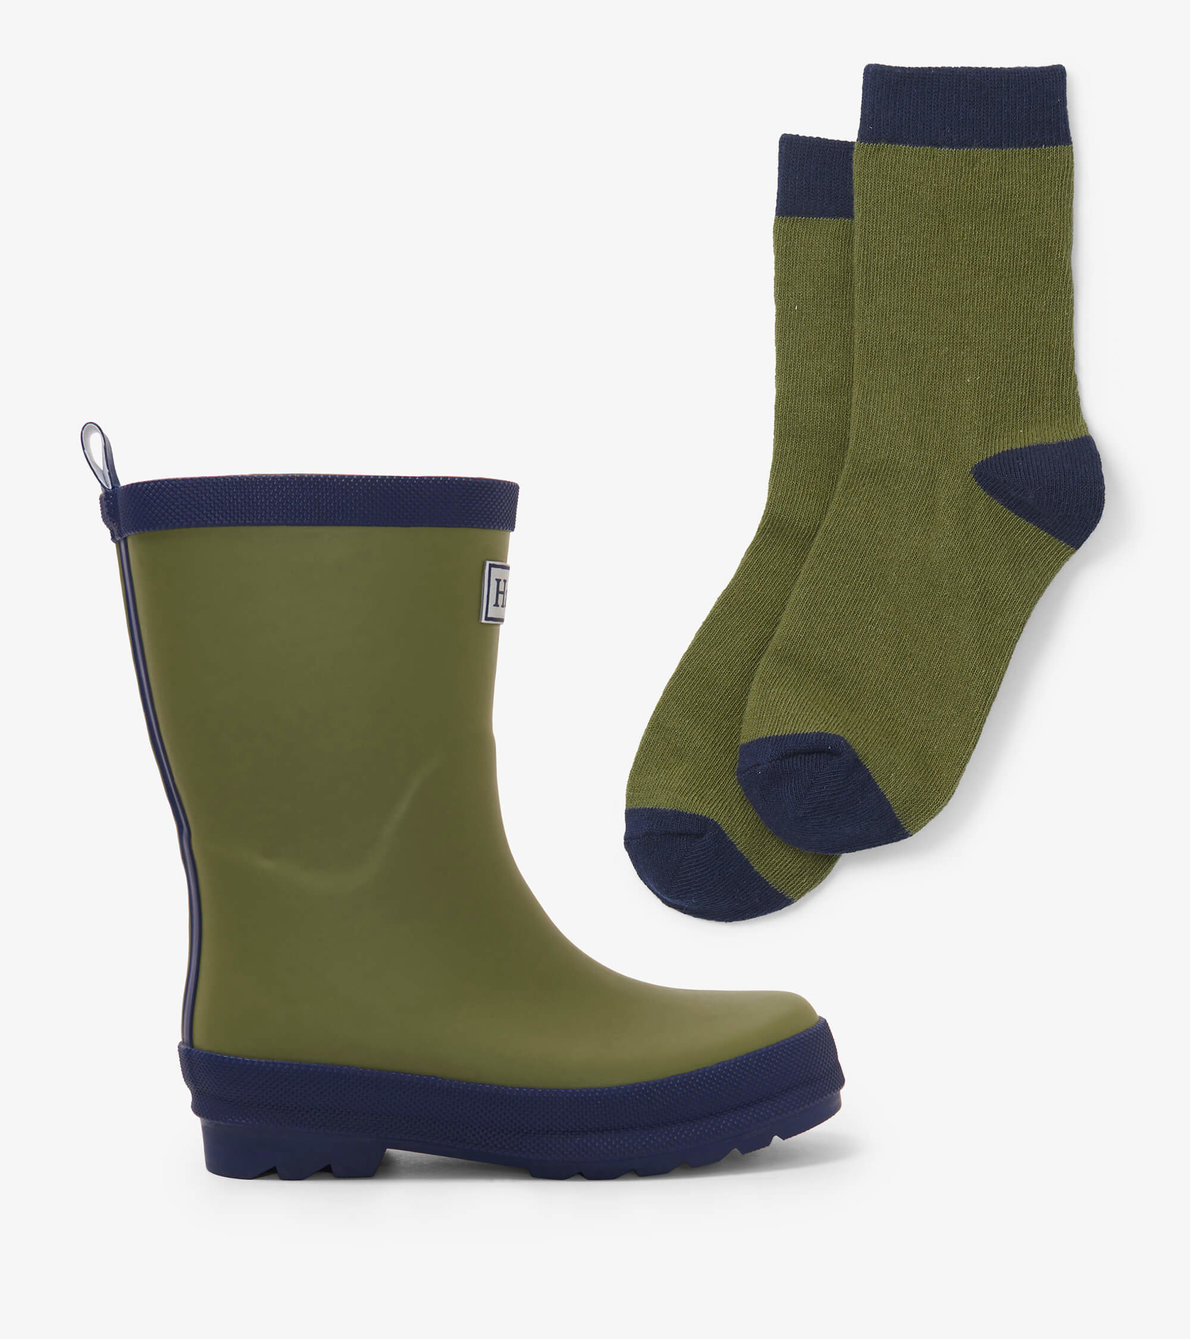 View larger image of Forest Green Matte Kids Rain Boots